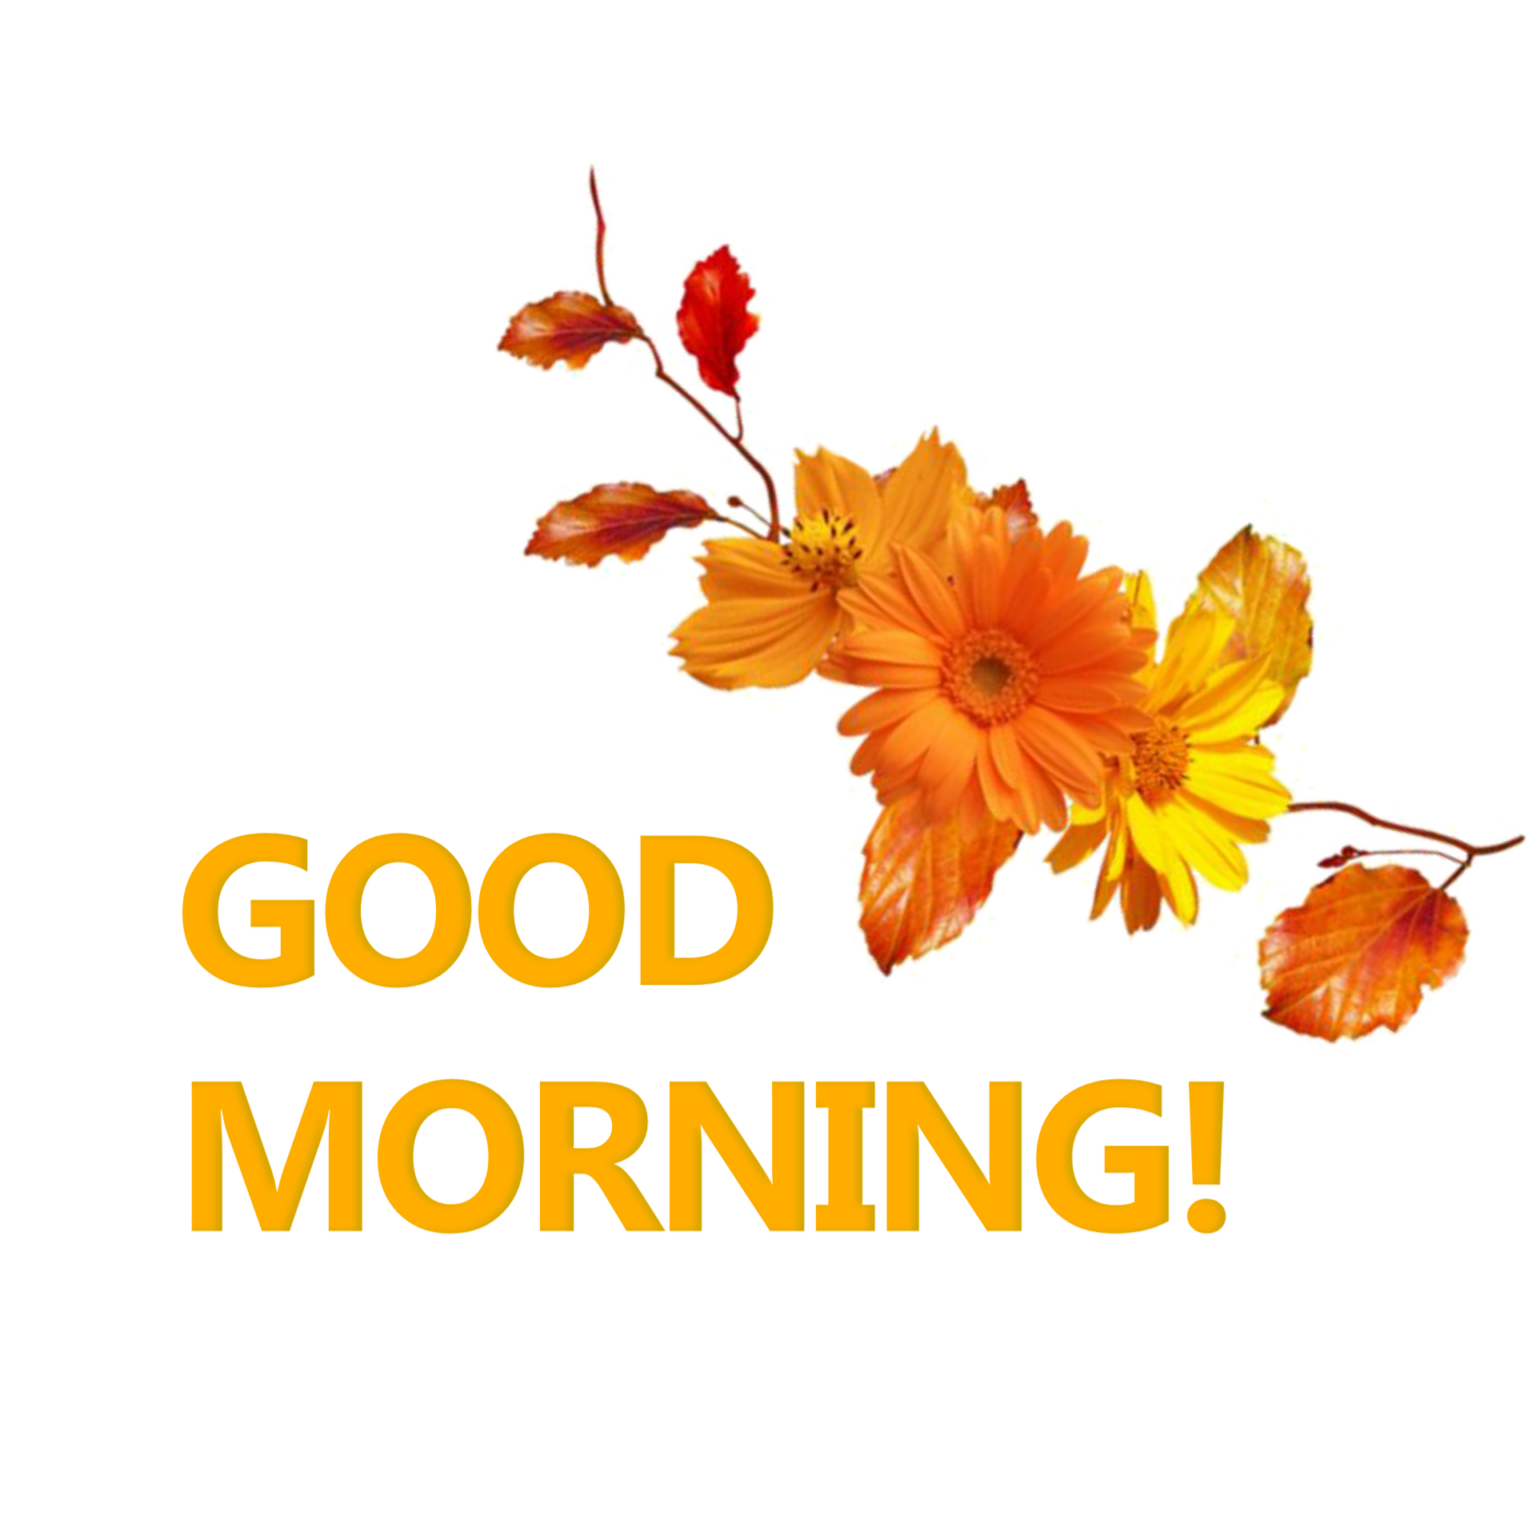 Good Morning PNG Transparent Images Free Download - Pngfre